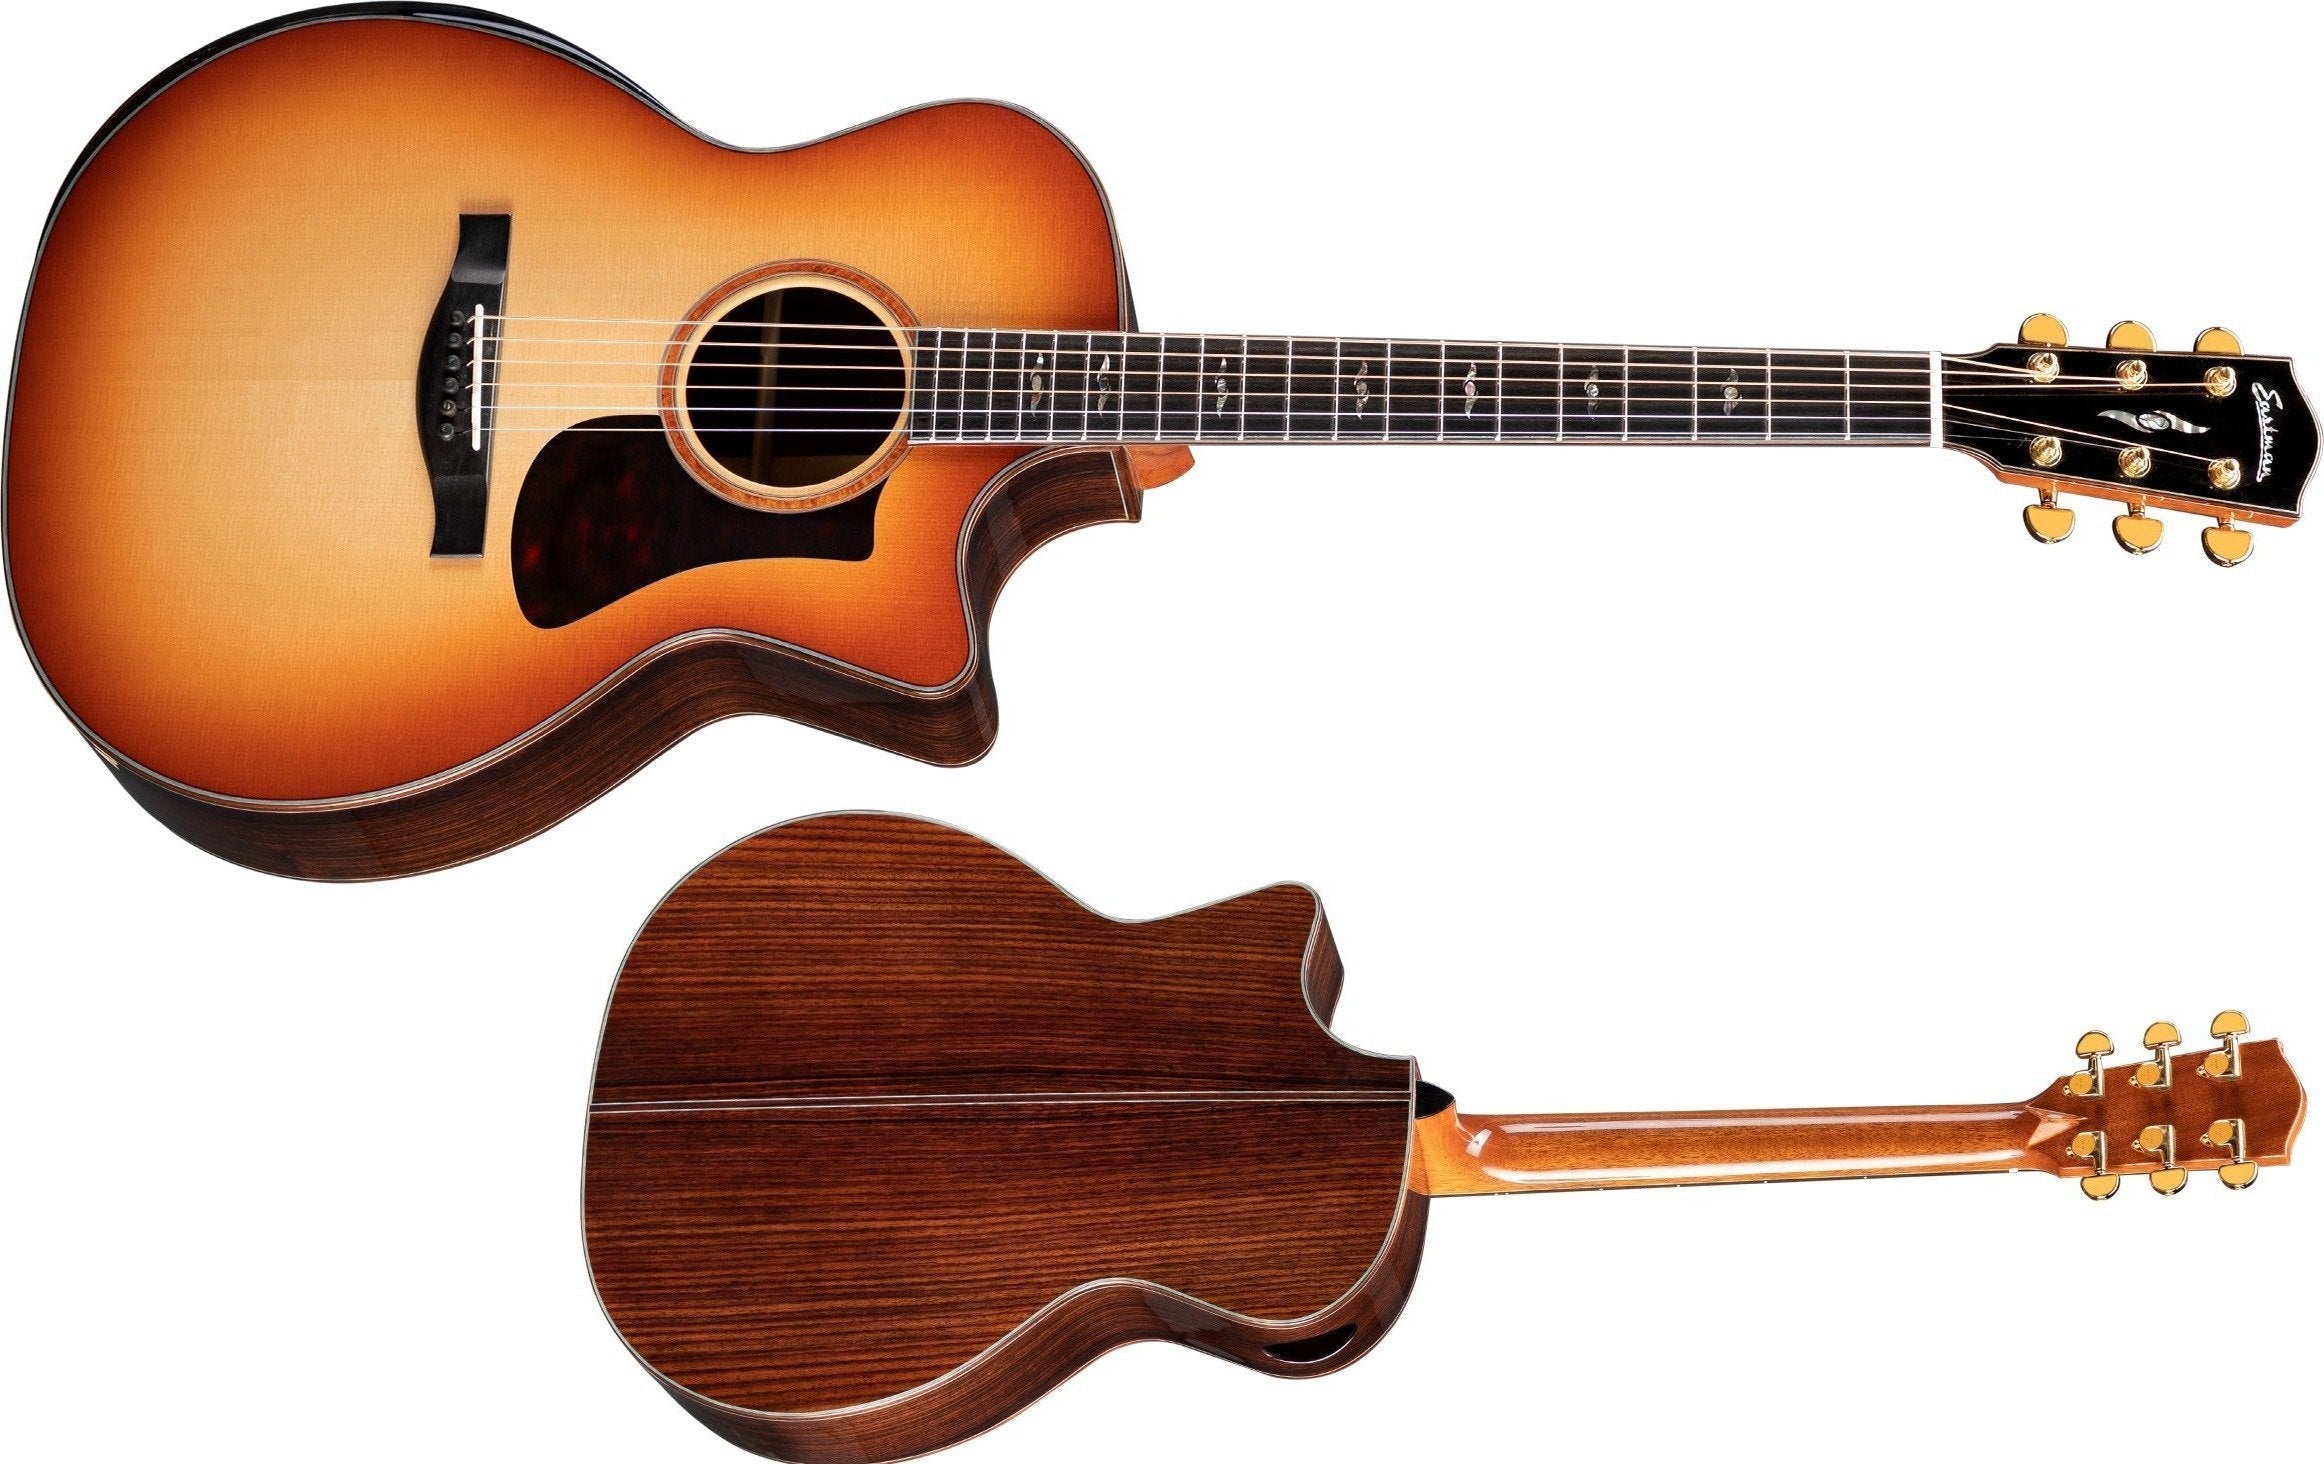 Eastman AC722CE-DF Grand Auditorium w/ cutaway, Electro Acoustic Guitar for sale at Richards Guitars.